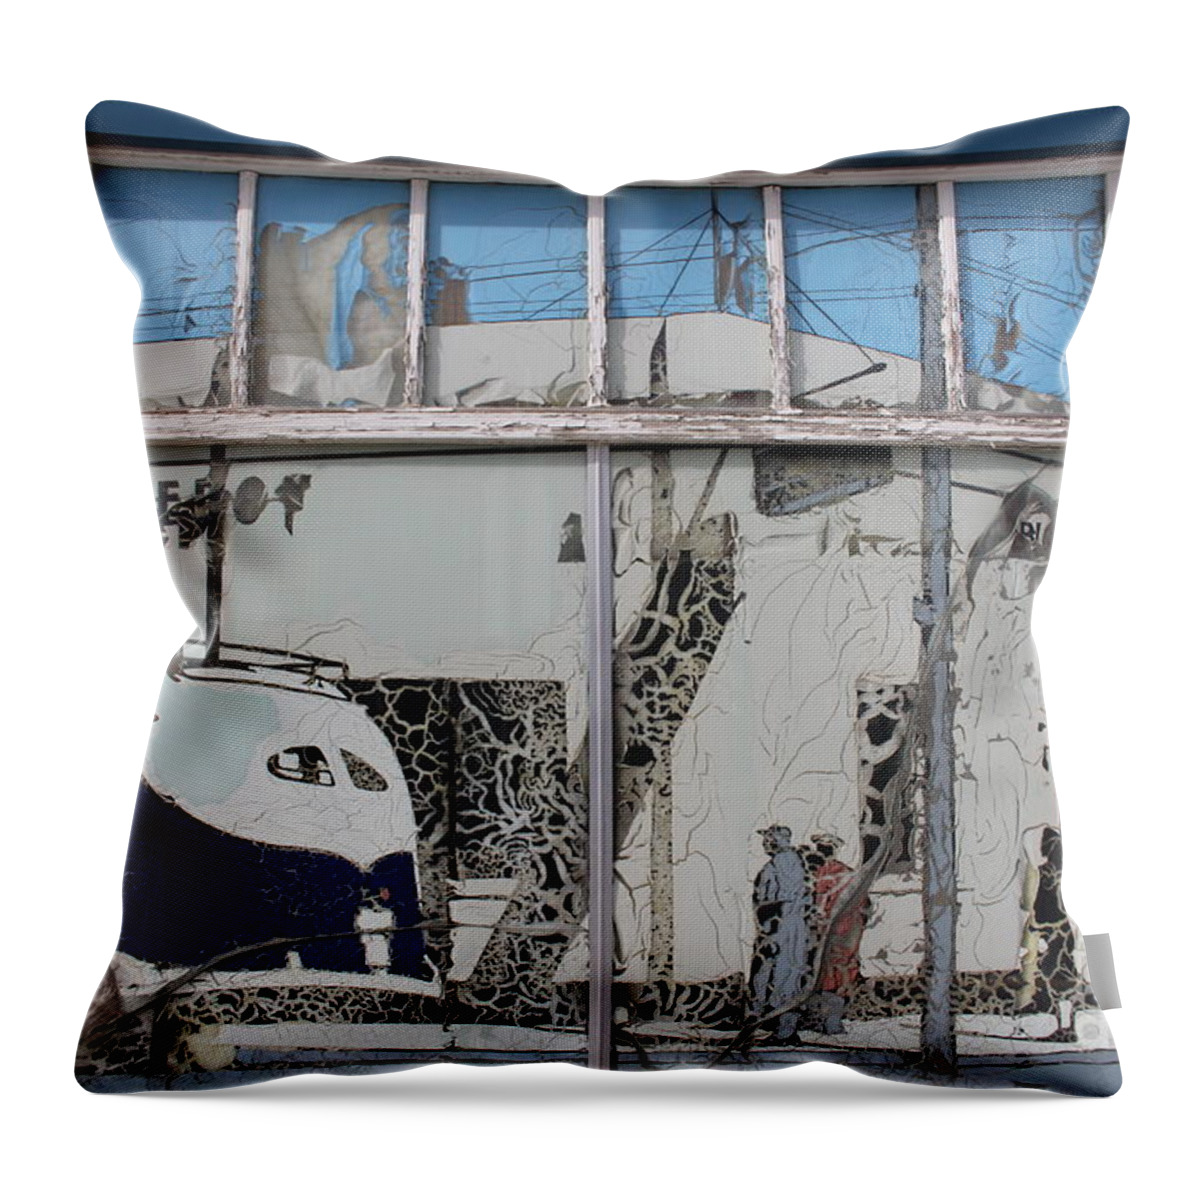 Bus Depot Throw Pillow featuring the photograph Vintage Bus Depot Sign by Suzanne Lorenz